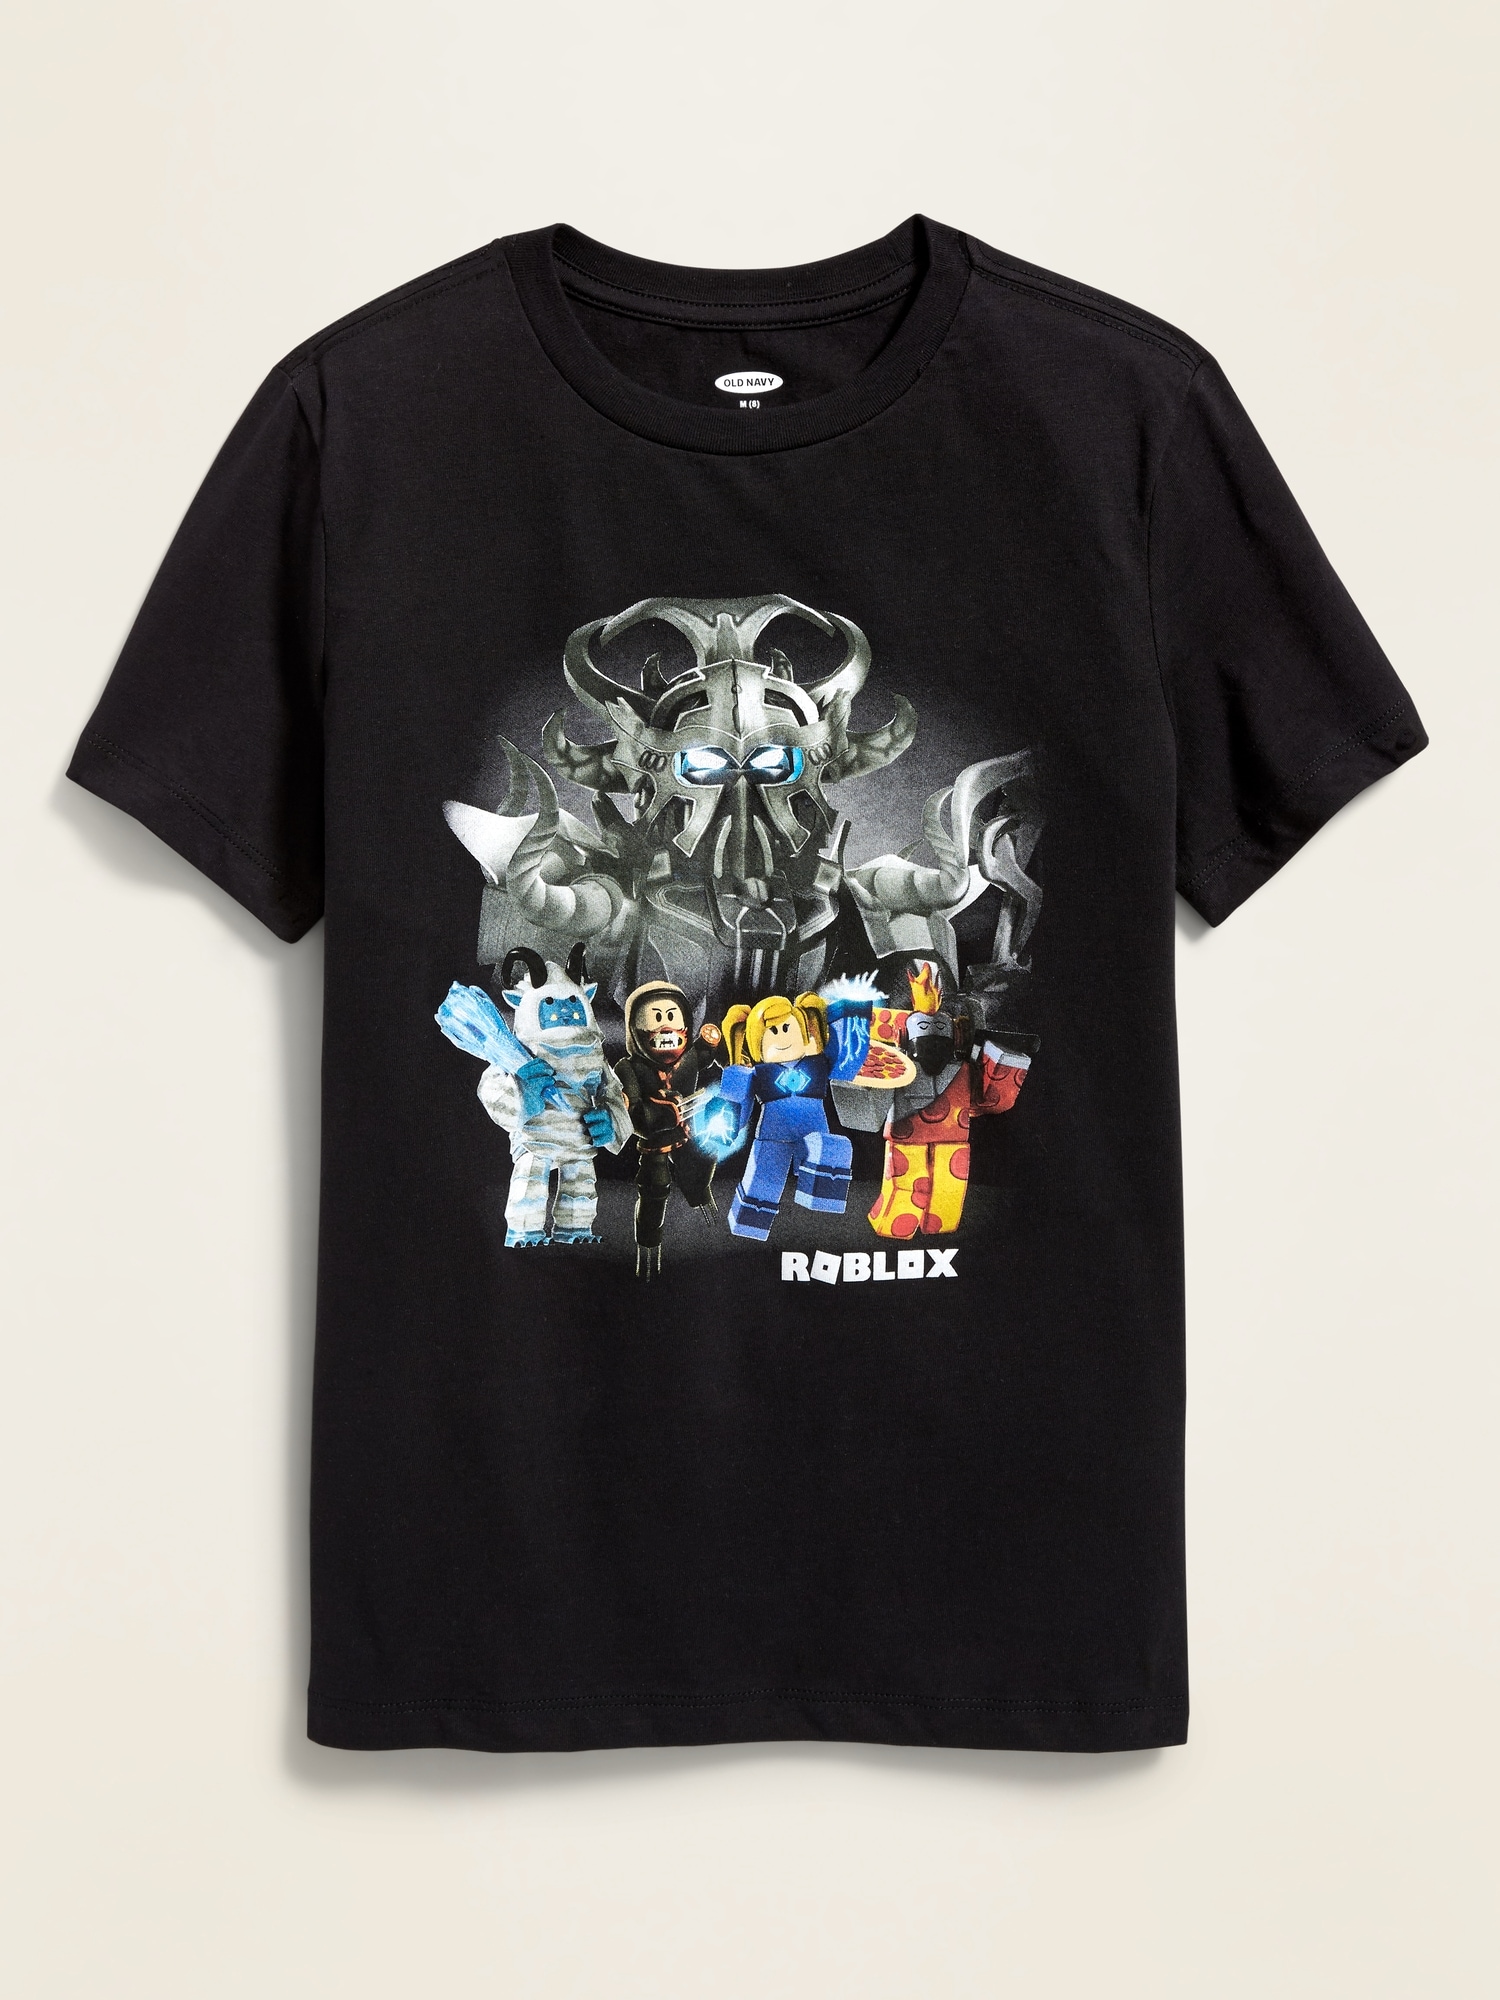 Roblox Graphic Tee For Boys Old Navy